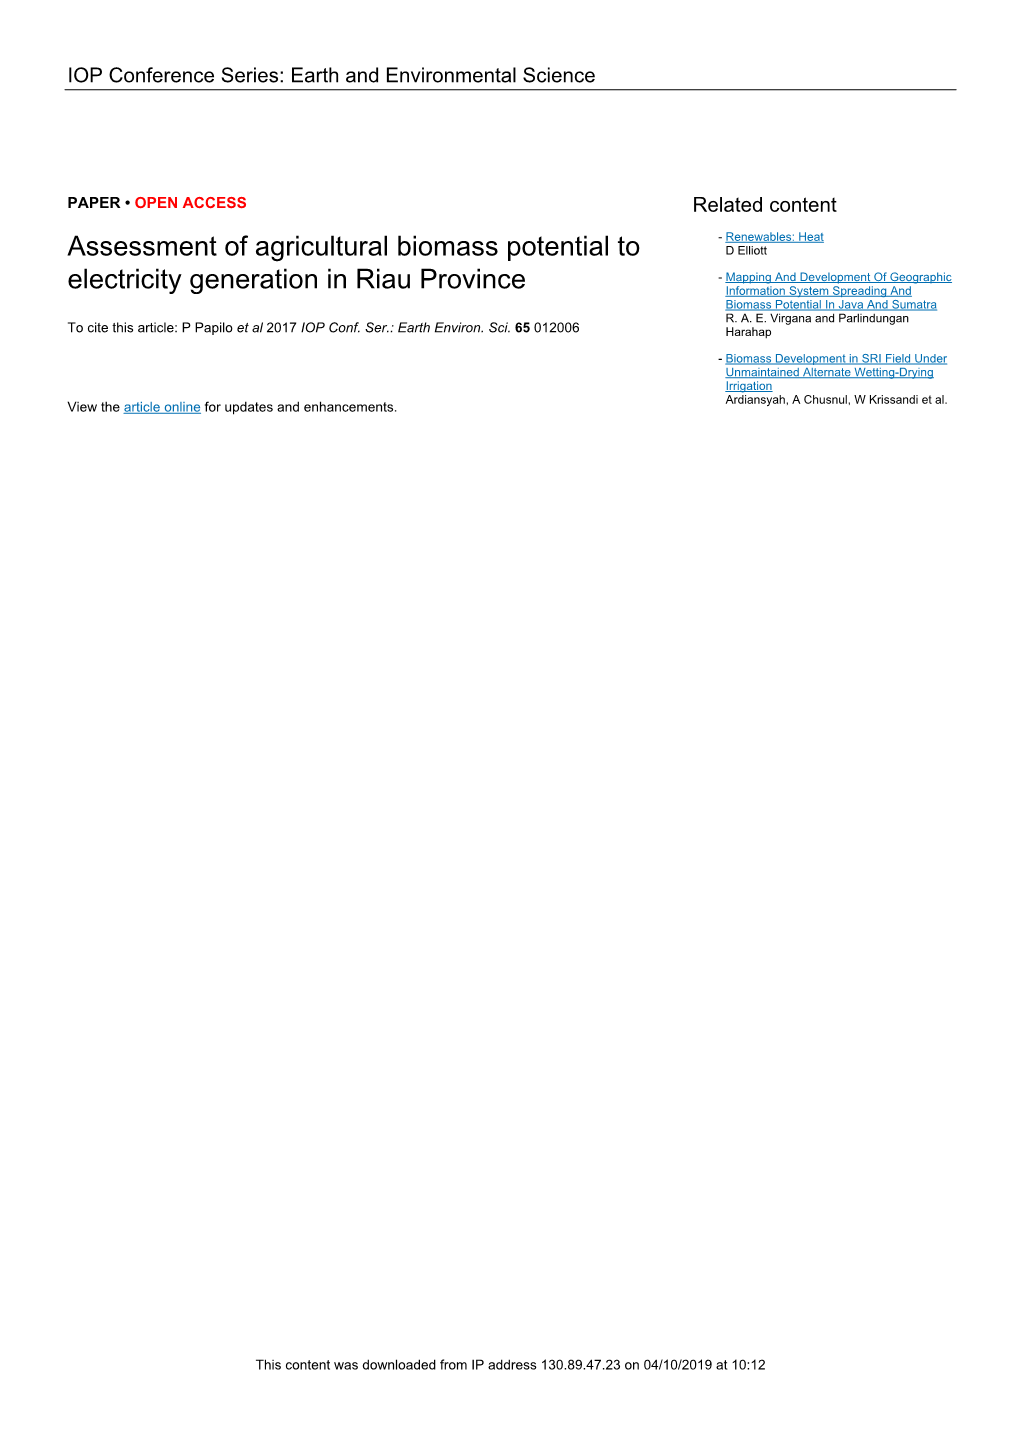 Assessment of Agricultural Biomass Potential to Electricity Generation in Riau Province